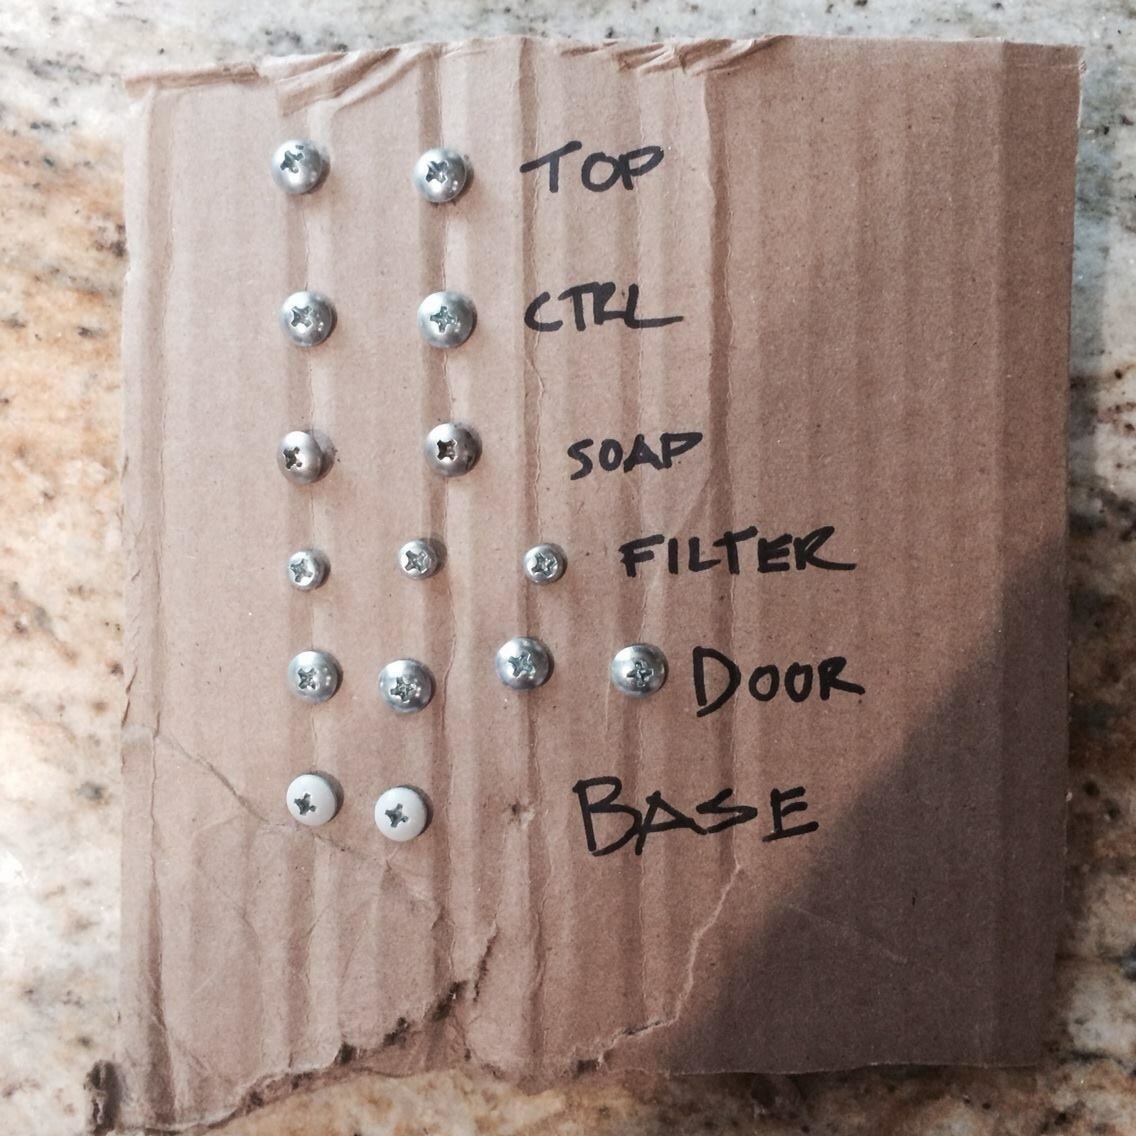 Bolts and functions on a cardboard piece